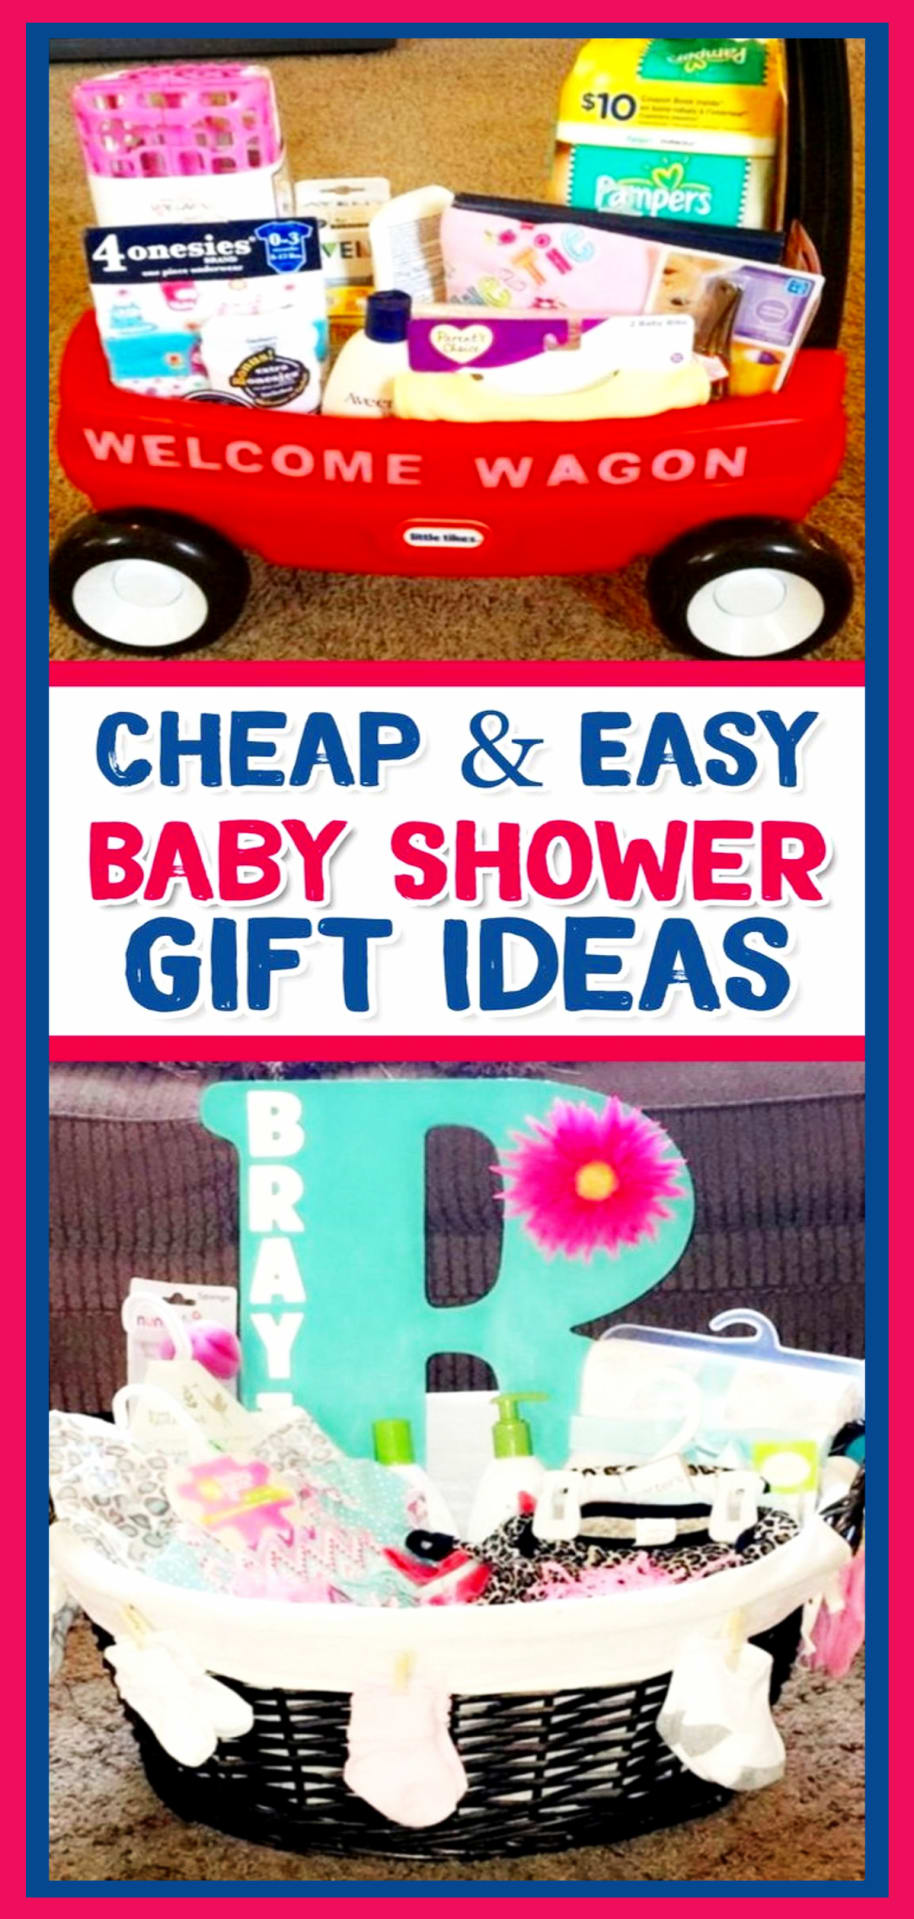 Homemade baby shower gift ideas - cheap baby shower gifts to make for boys, for girls or for unknown gender